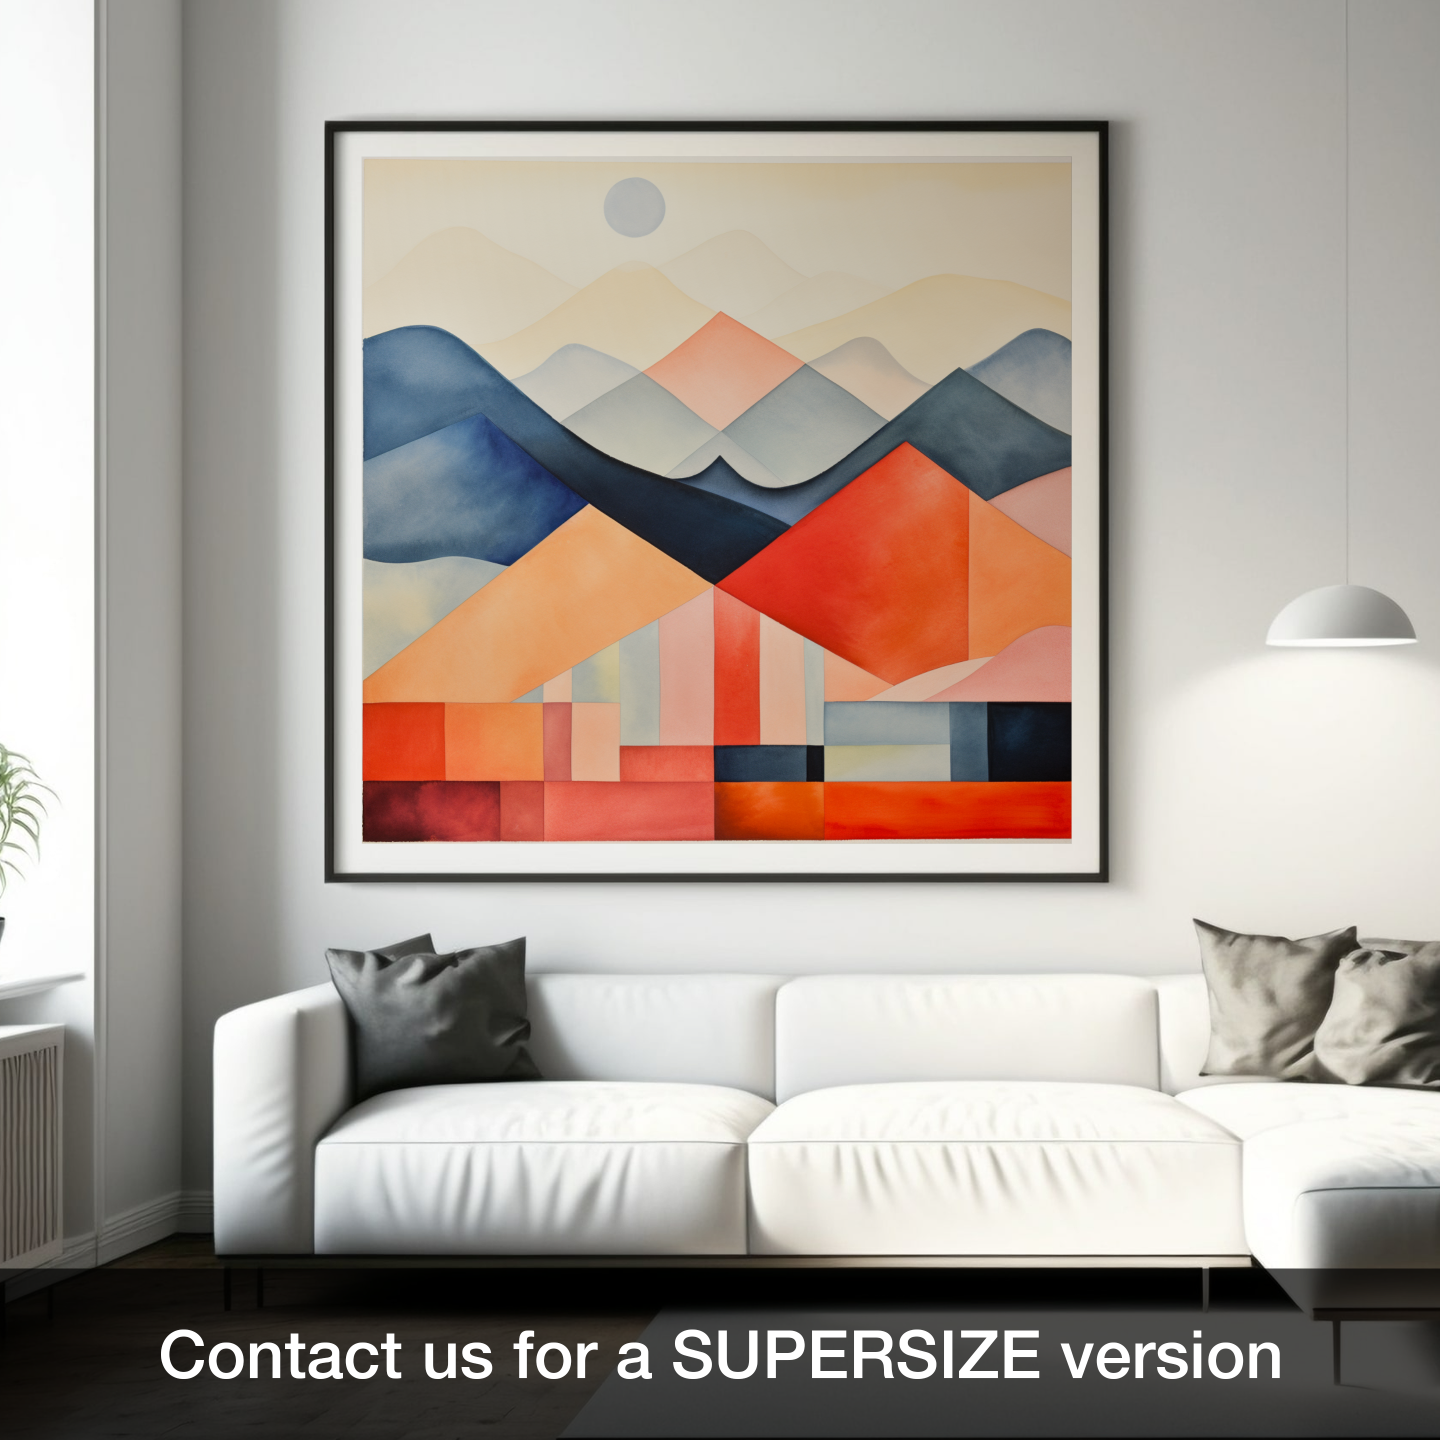 Glencoe Reimagined: A Symphony of Geometric Abstraction